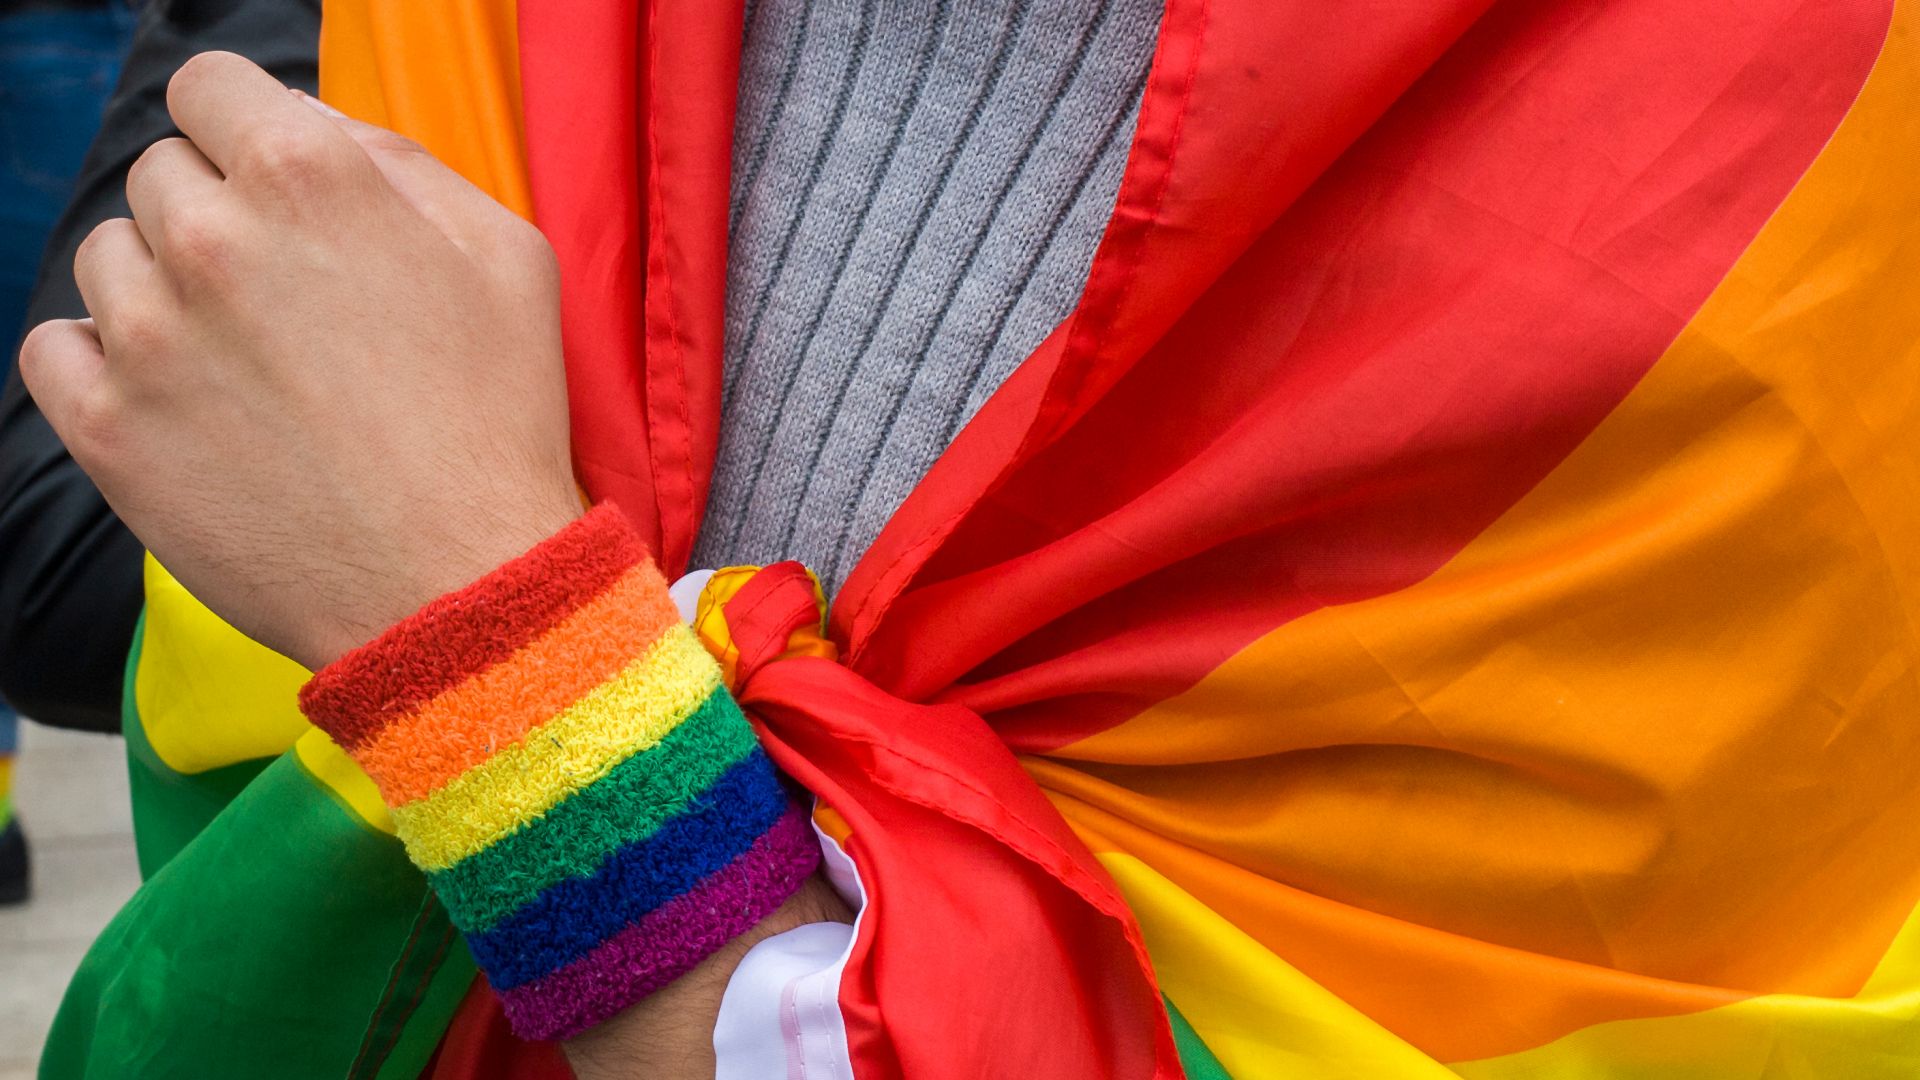 Protestor at a pro-LGBTI rally in Warsaw, Poland wrapped in a rainbow flag